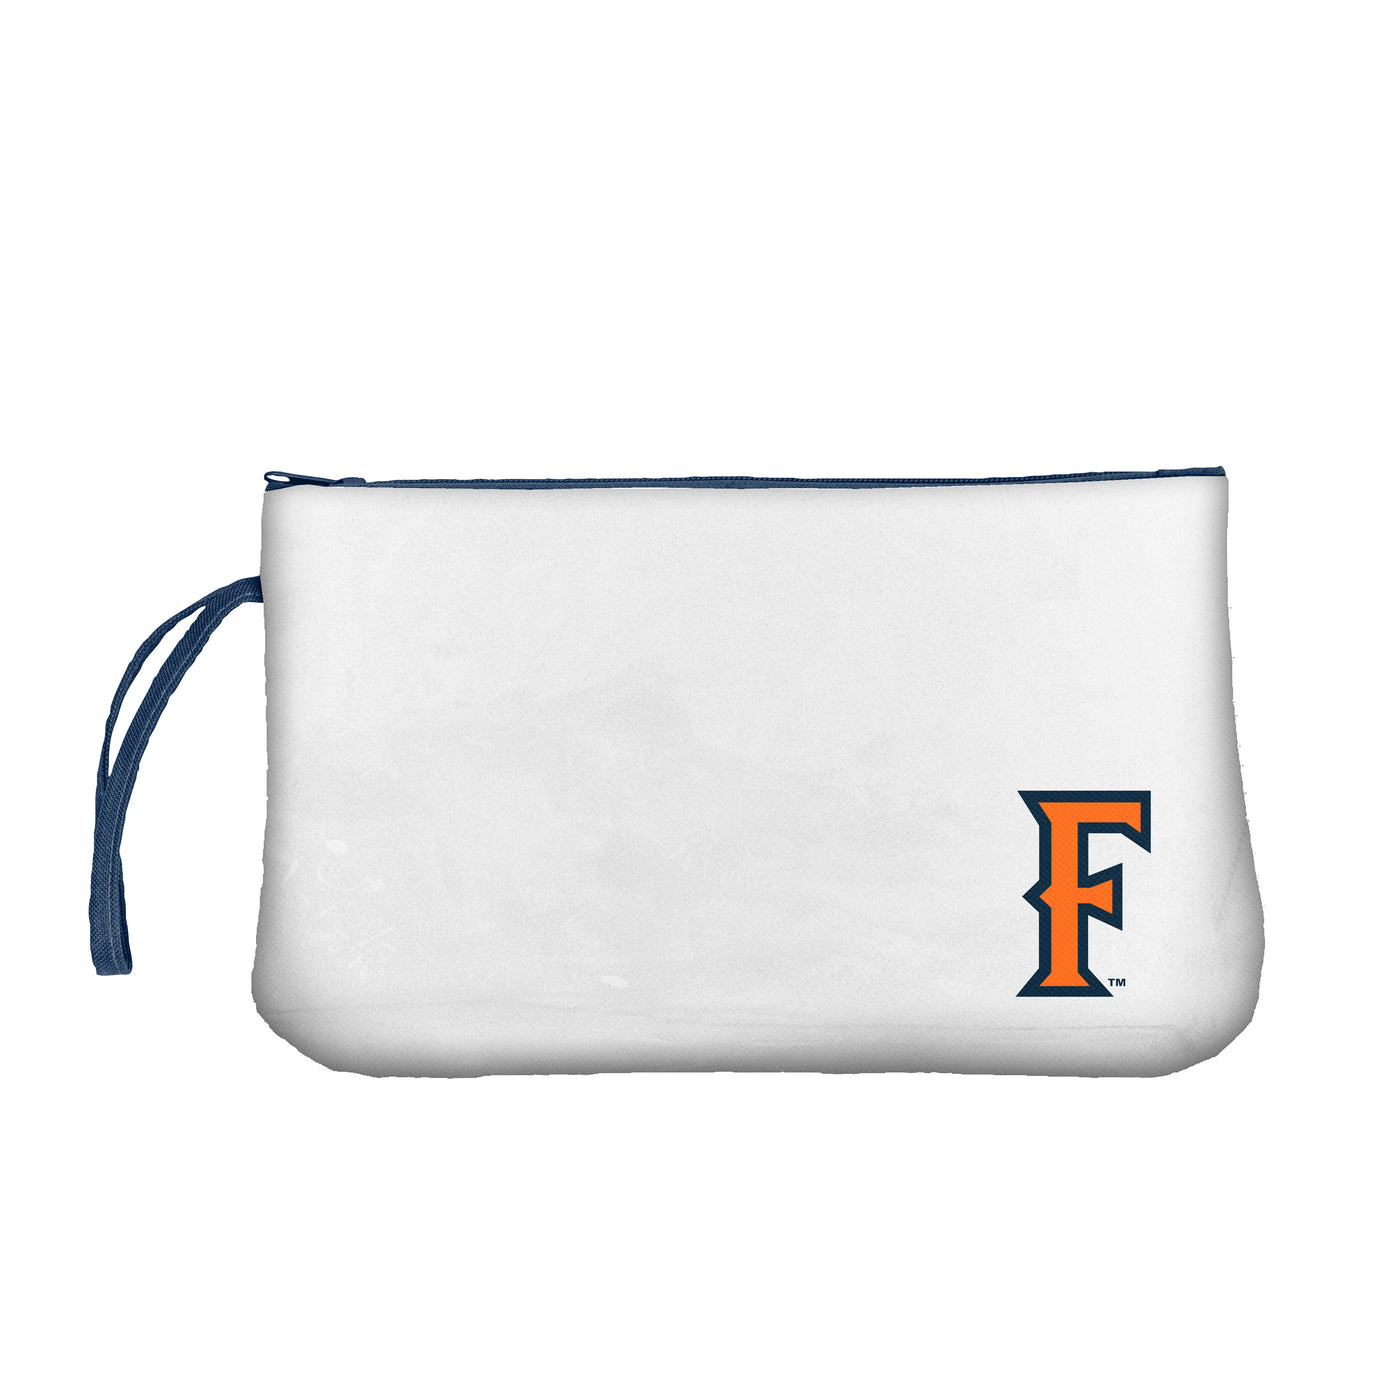 Cal State Fullerton Clear Wristlet